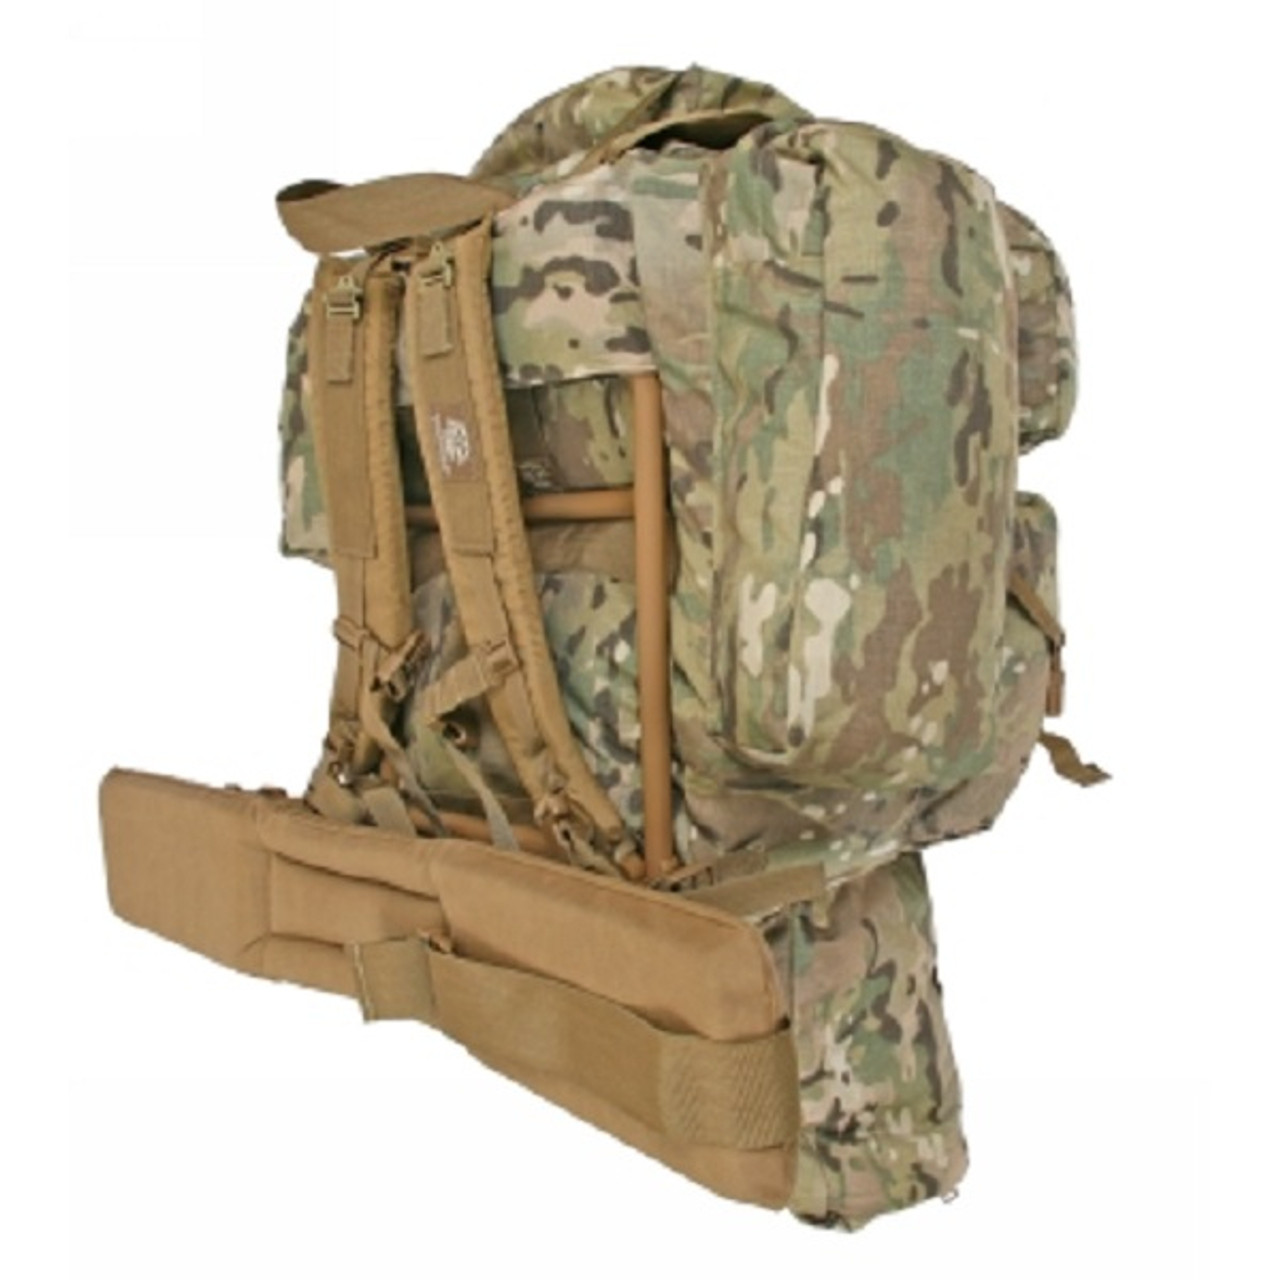 Tactical Tailor Malice Pack Version 2 Multicam